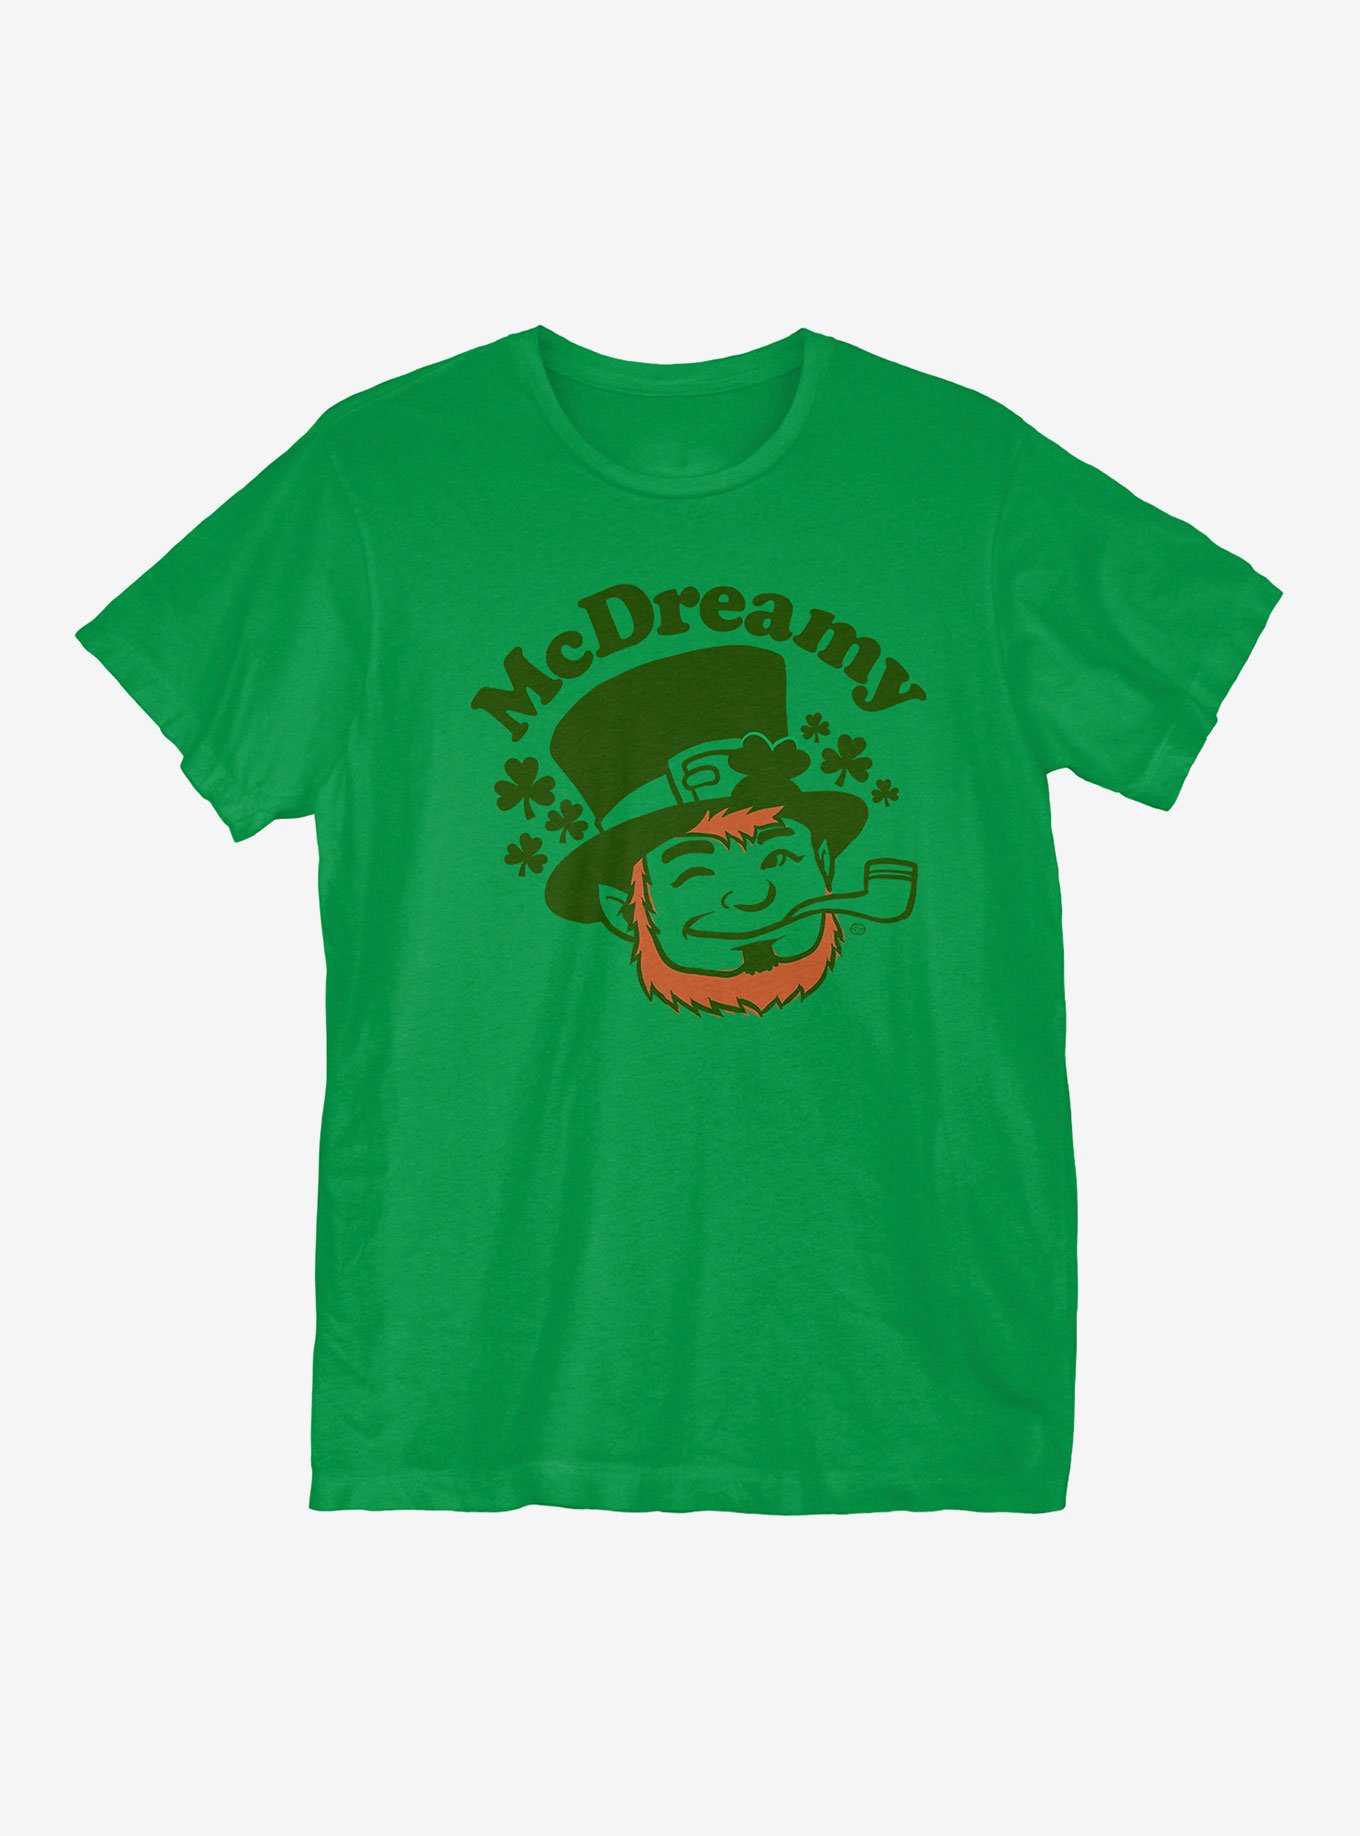 St Patrick's Day McDreamy T-Shirt, , hi-res